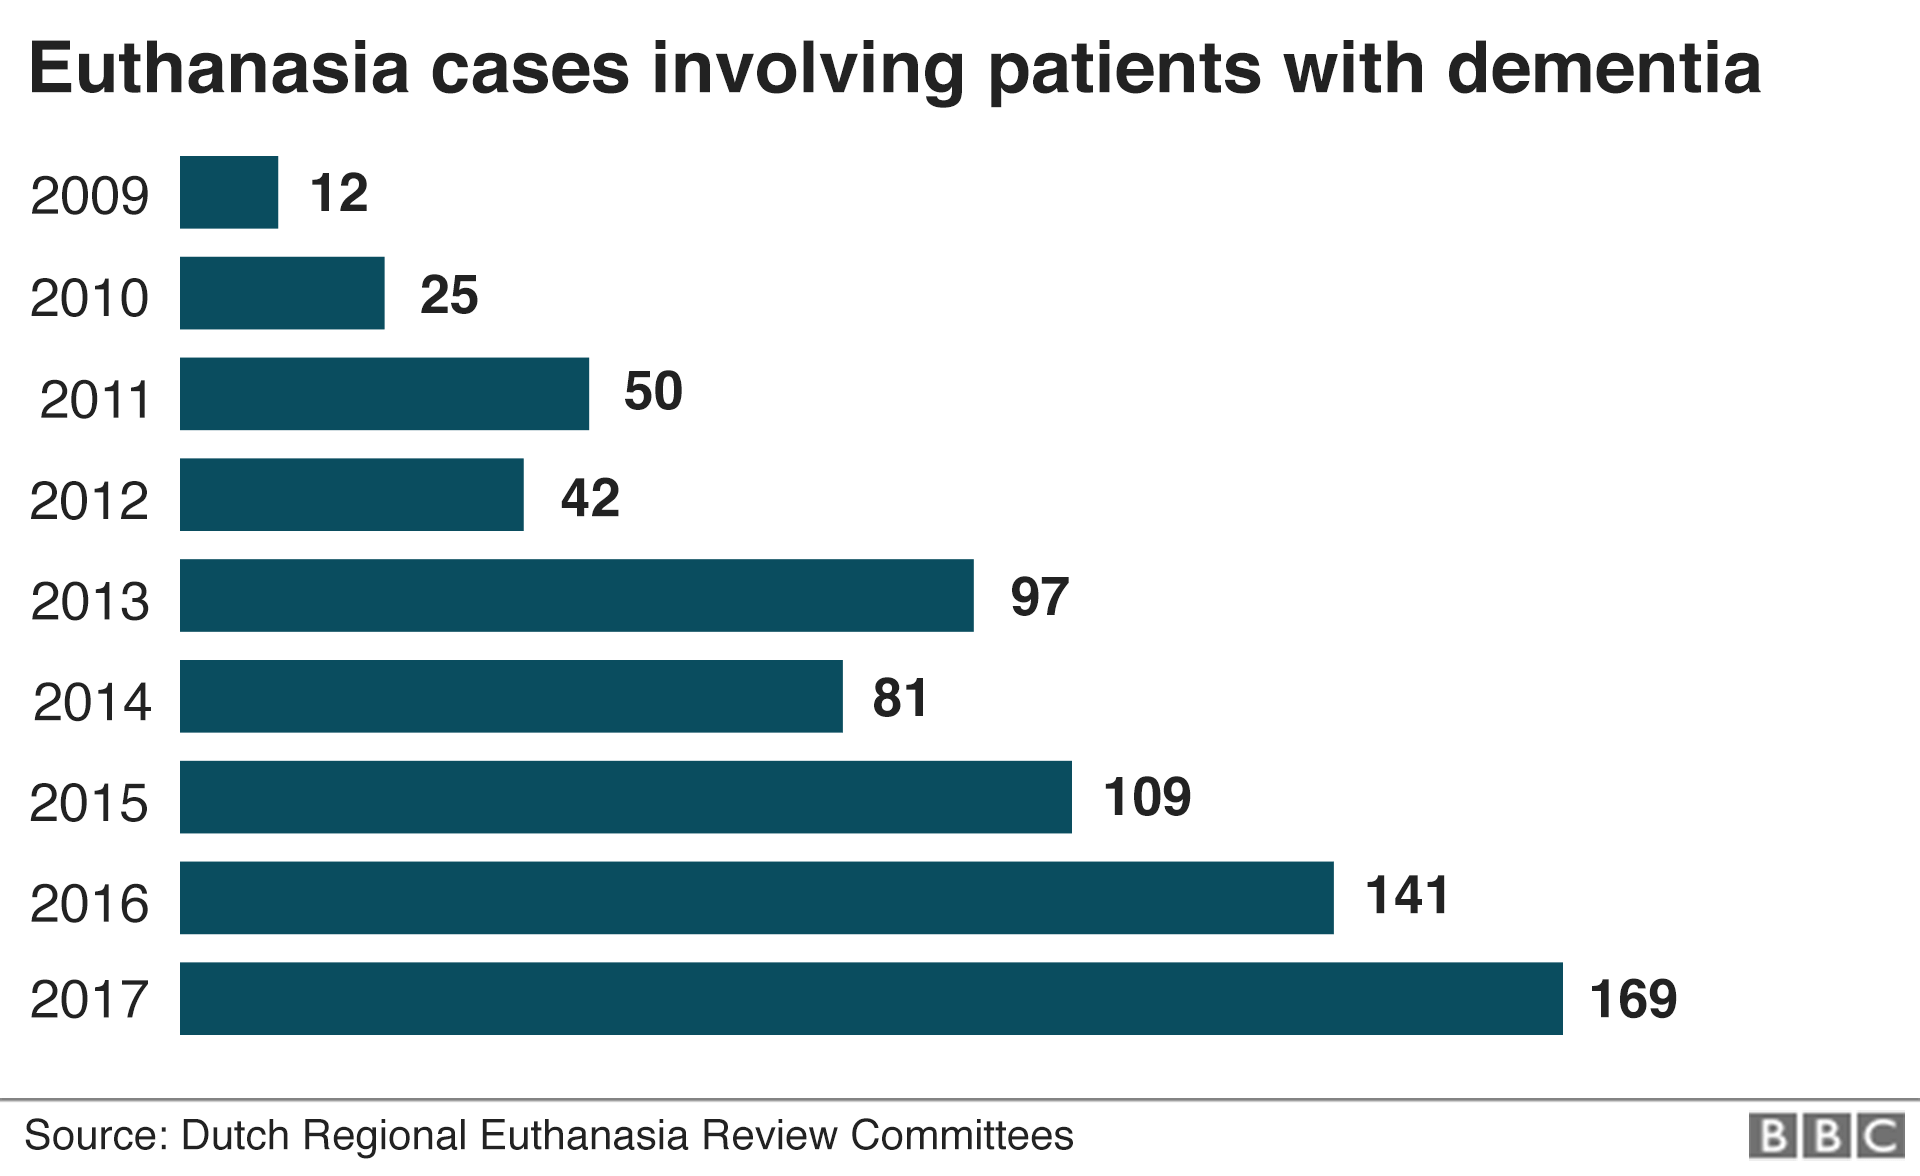 Bar chart showing euthanasia cases involving dementia patients since 2009